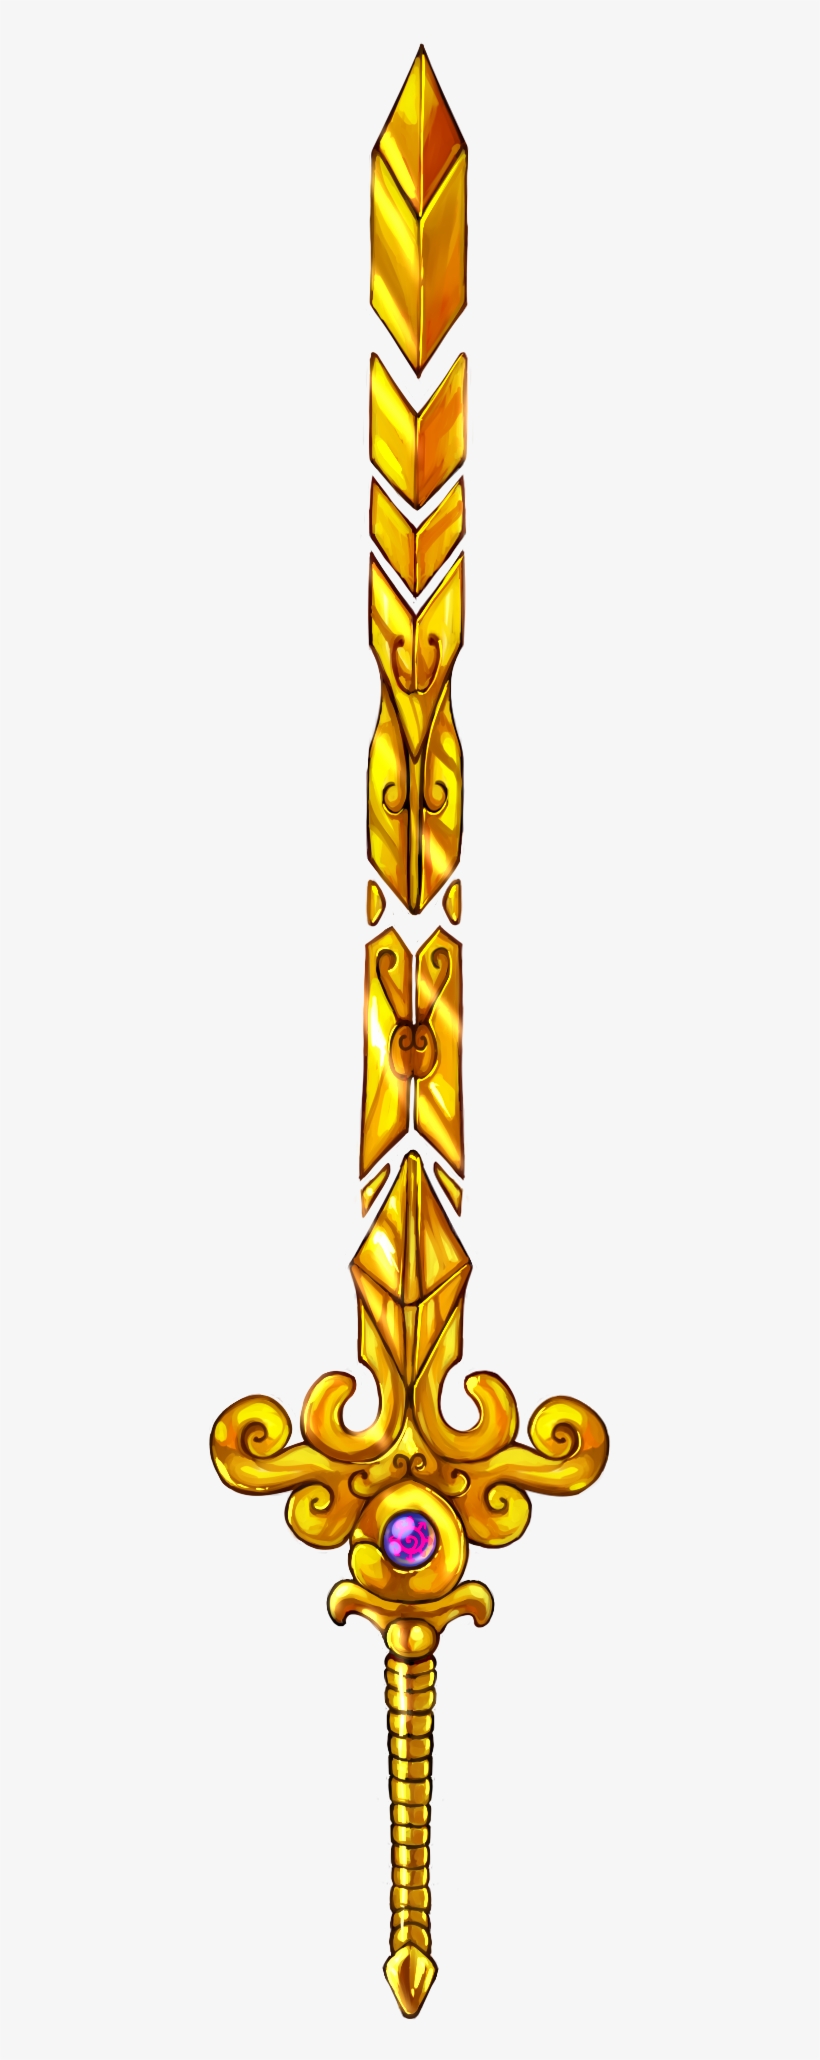 Golden Chaos - Stained Glass, transparent png #9052549